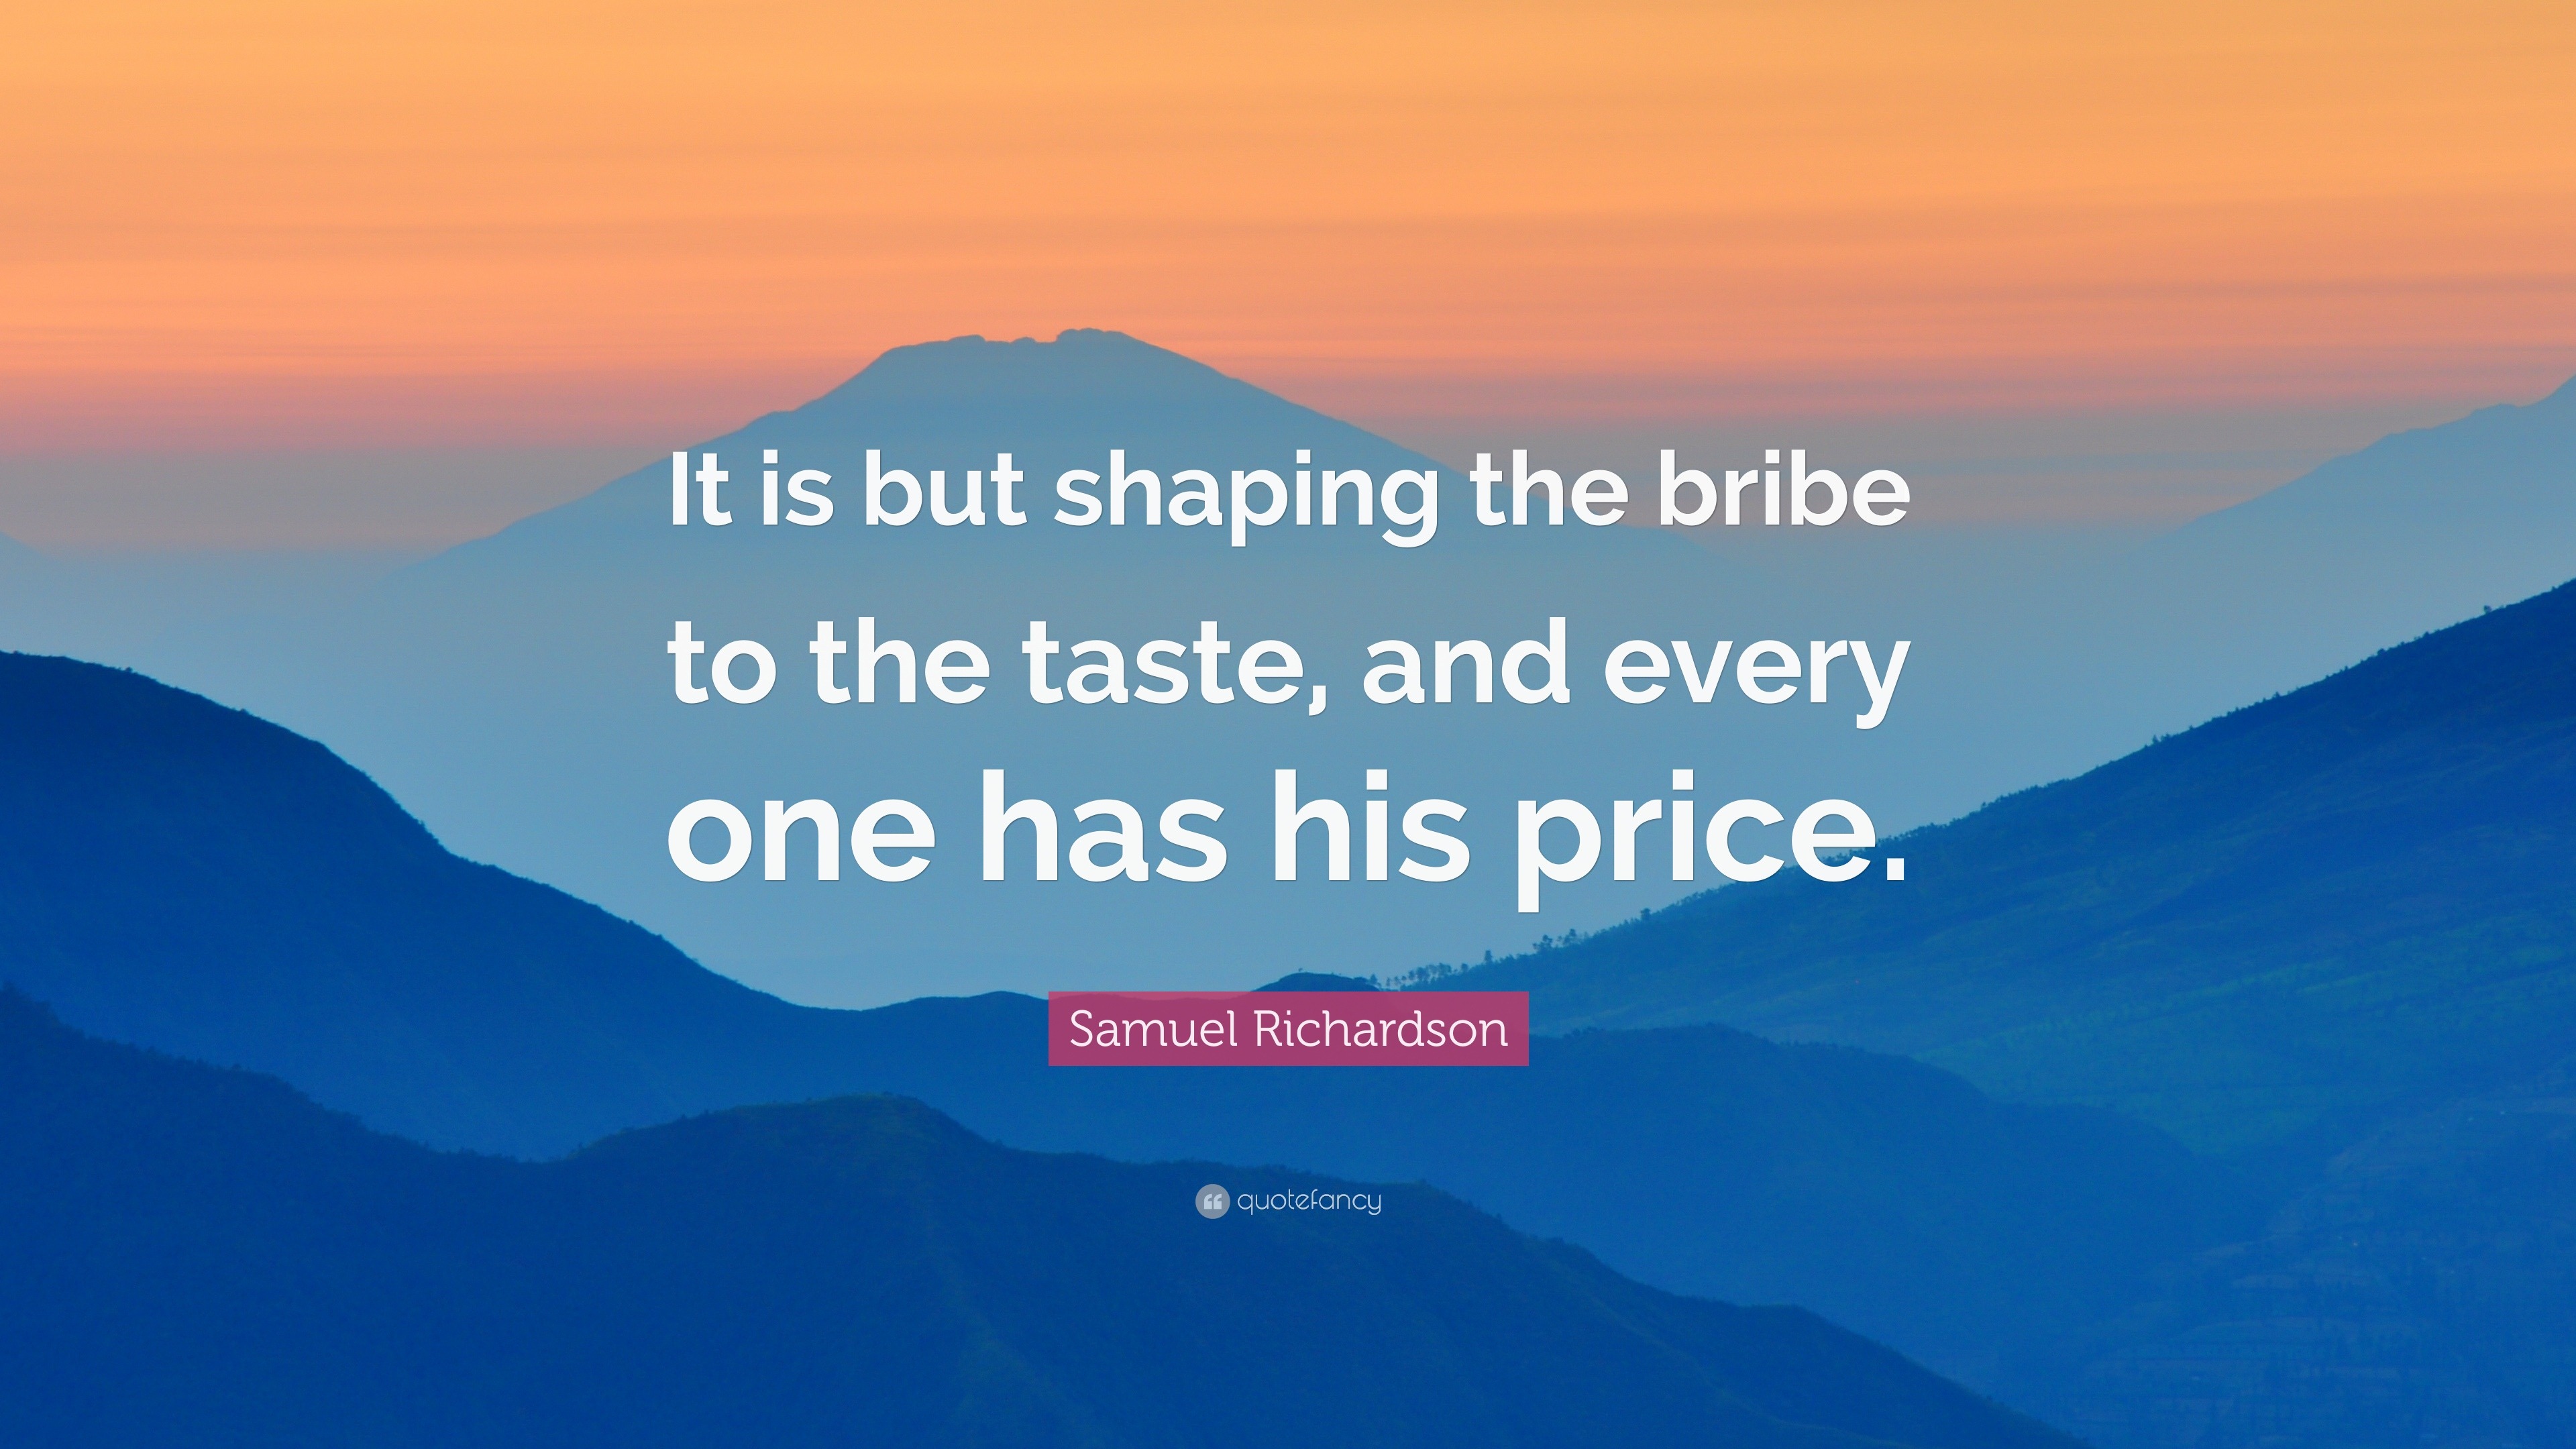 It is but shaping the bribe to the taste, and every one has his price. 